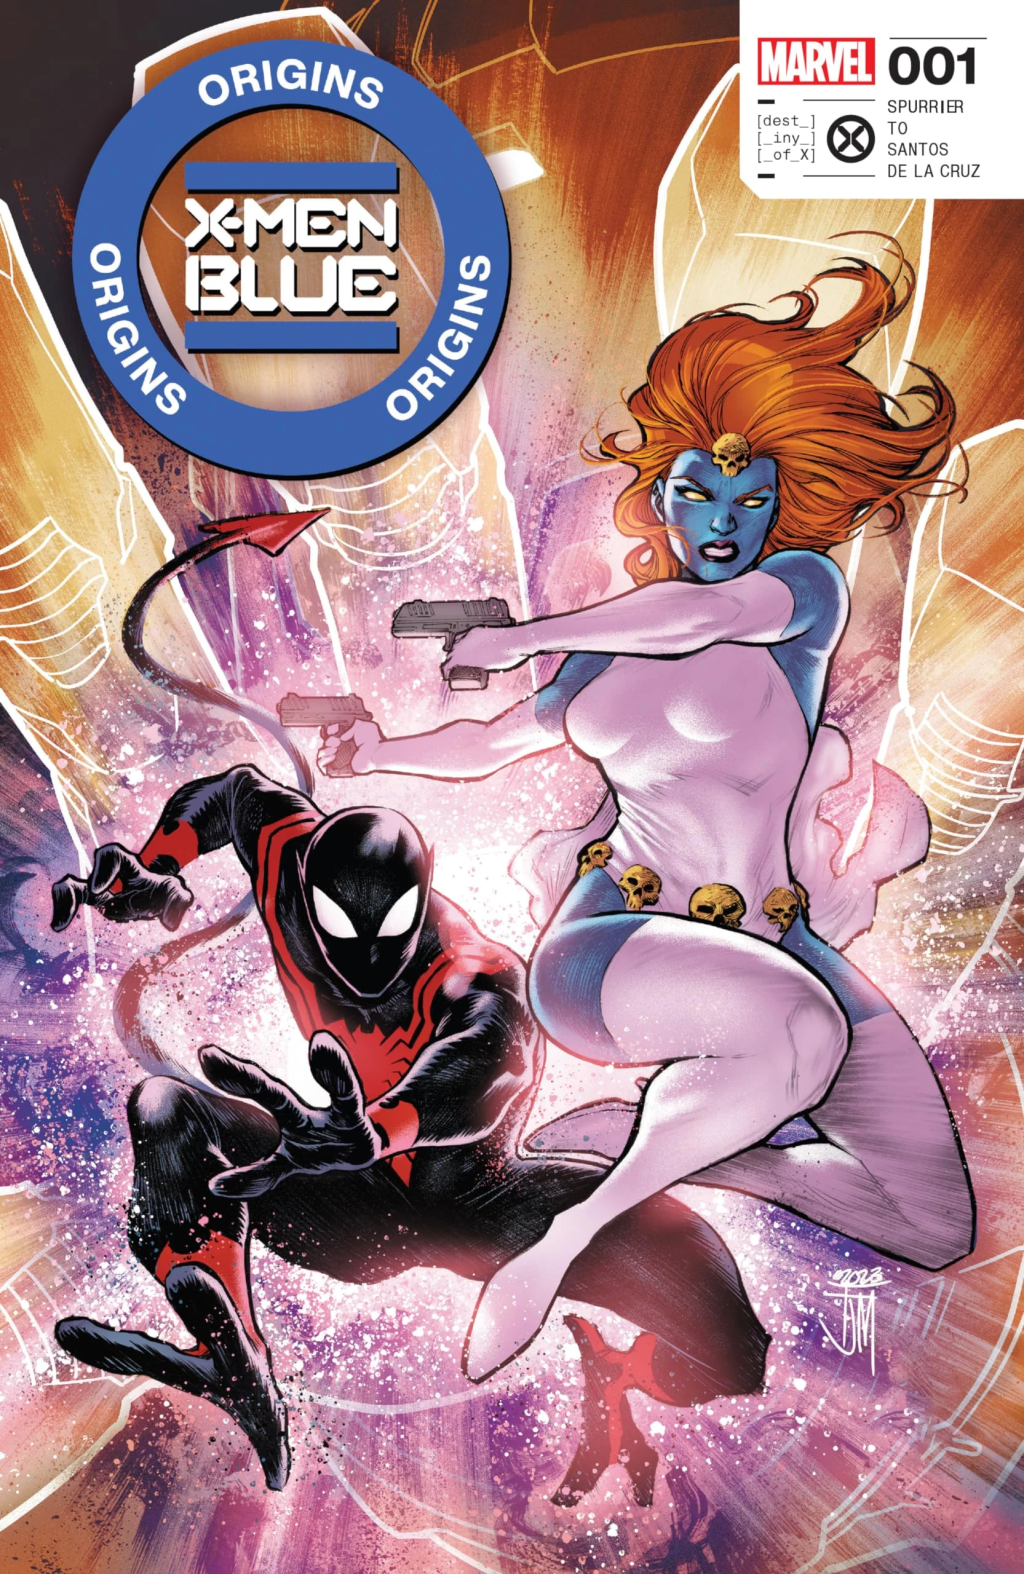 Nightcrawler and Mystique leap into action on Francis Manapul's cover to X-Men: Blue - Origins Vol. 1 #1 (2023), Marvel Comics